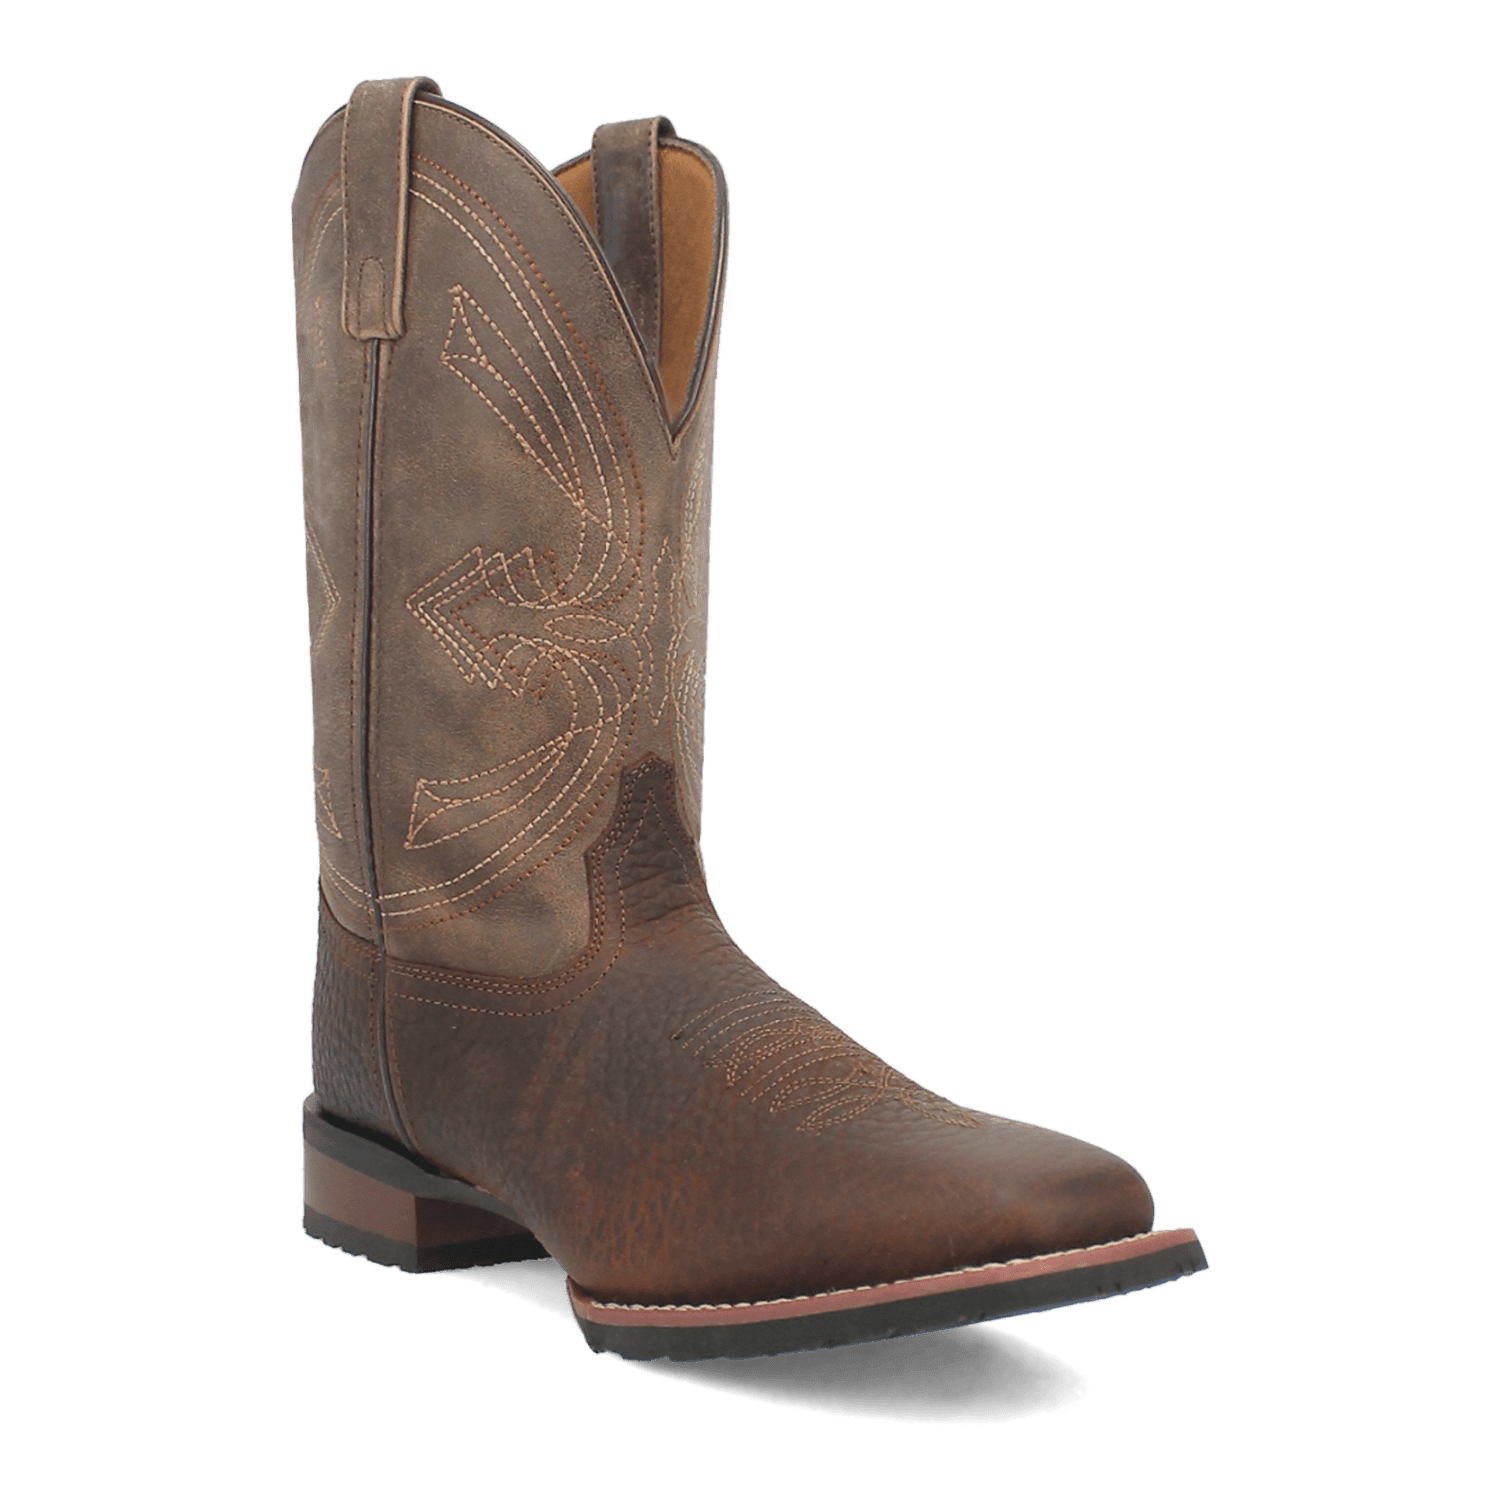 ELIAS LEATHER BOOT Cover